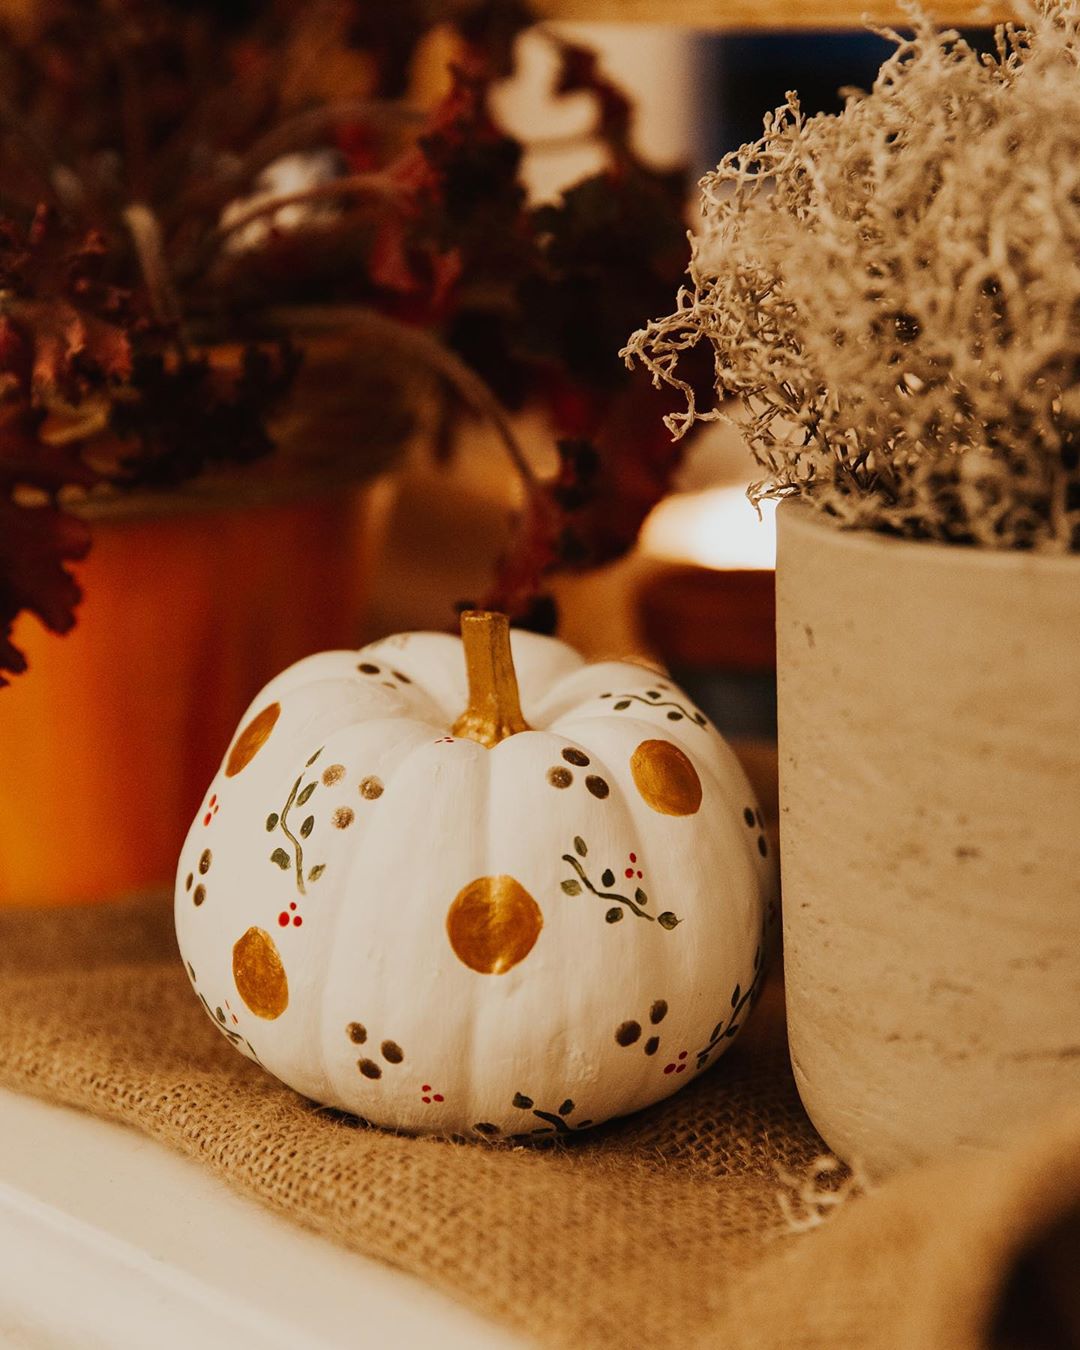 Pumpkin Painted White with Gold Circles. Photo by Instagram user @jessiewhealy